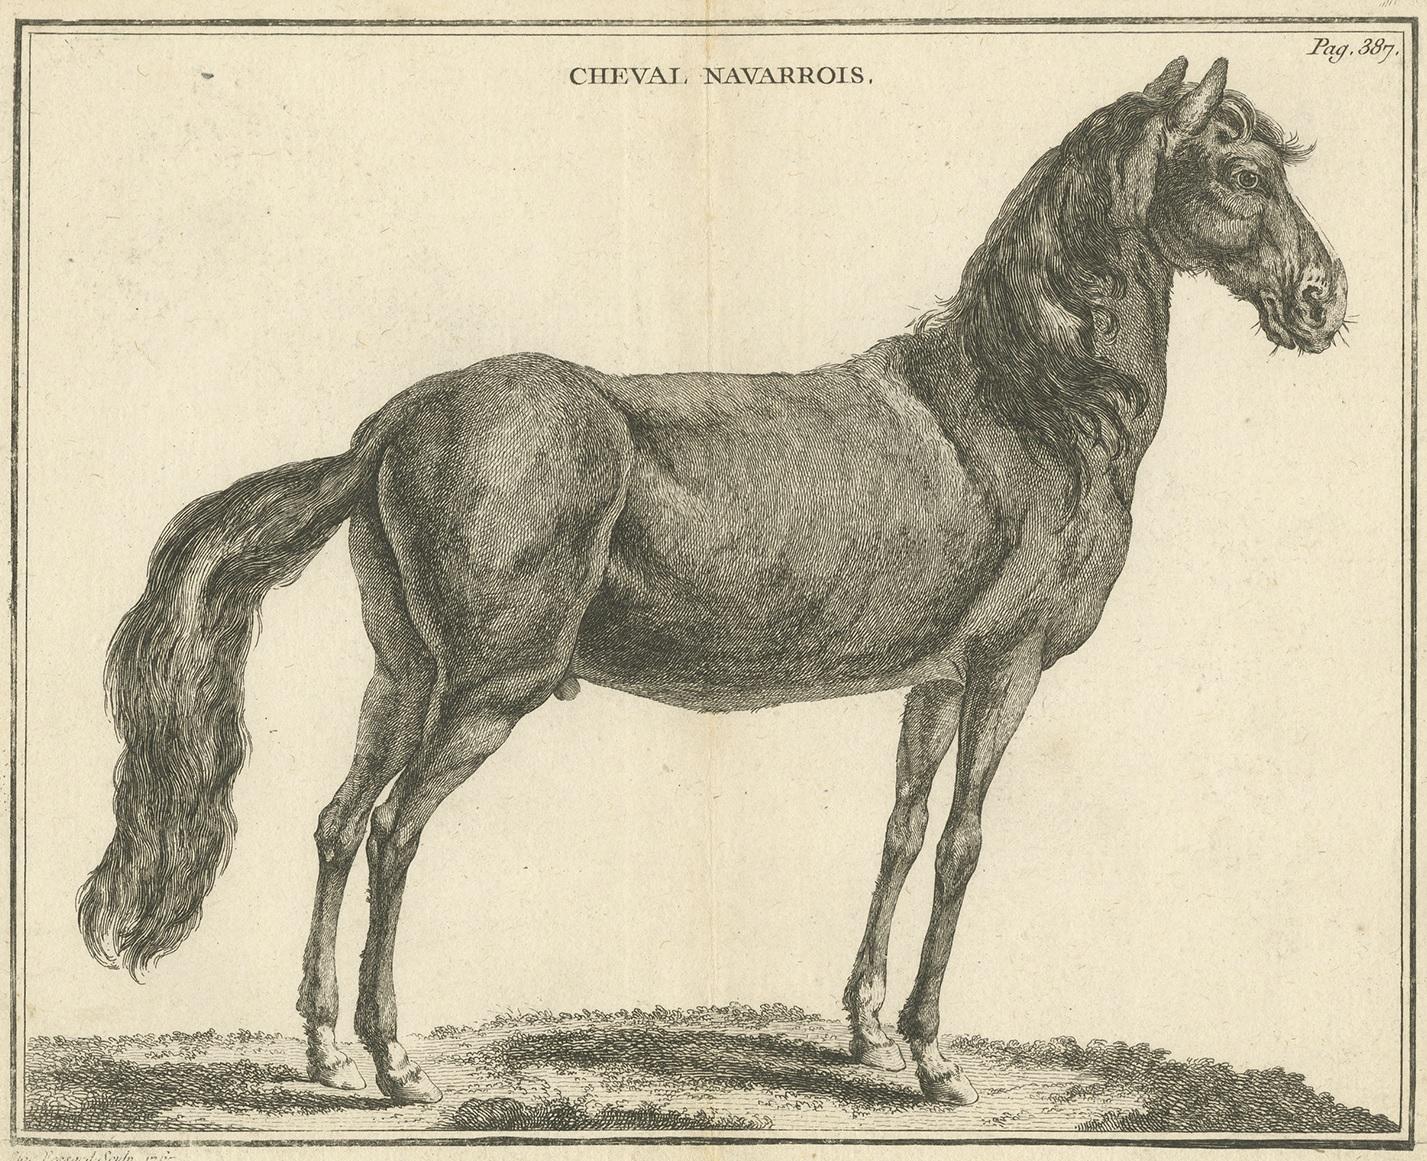 Antique print titled 'Cheval Navarrois'. Copper engraving of a Cheval Navarrin, also called Navarin, Navarrois, Tarbais, Tarbésan or Bigourdin, an extinct breed of light saddle-horse from south-western France. It was bred principally in the plains